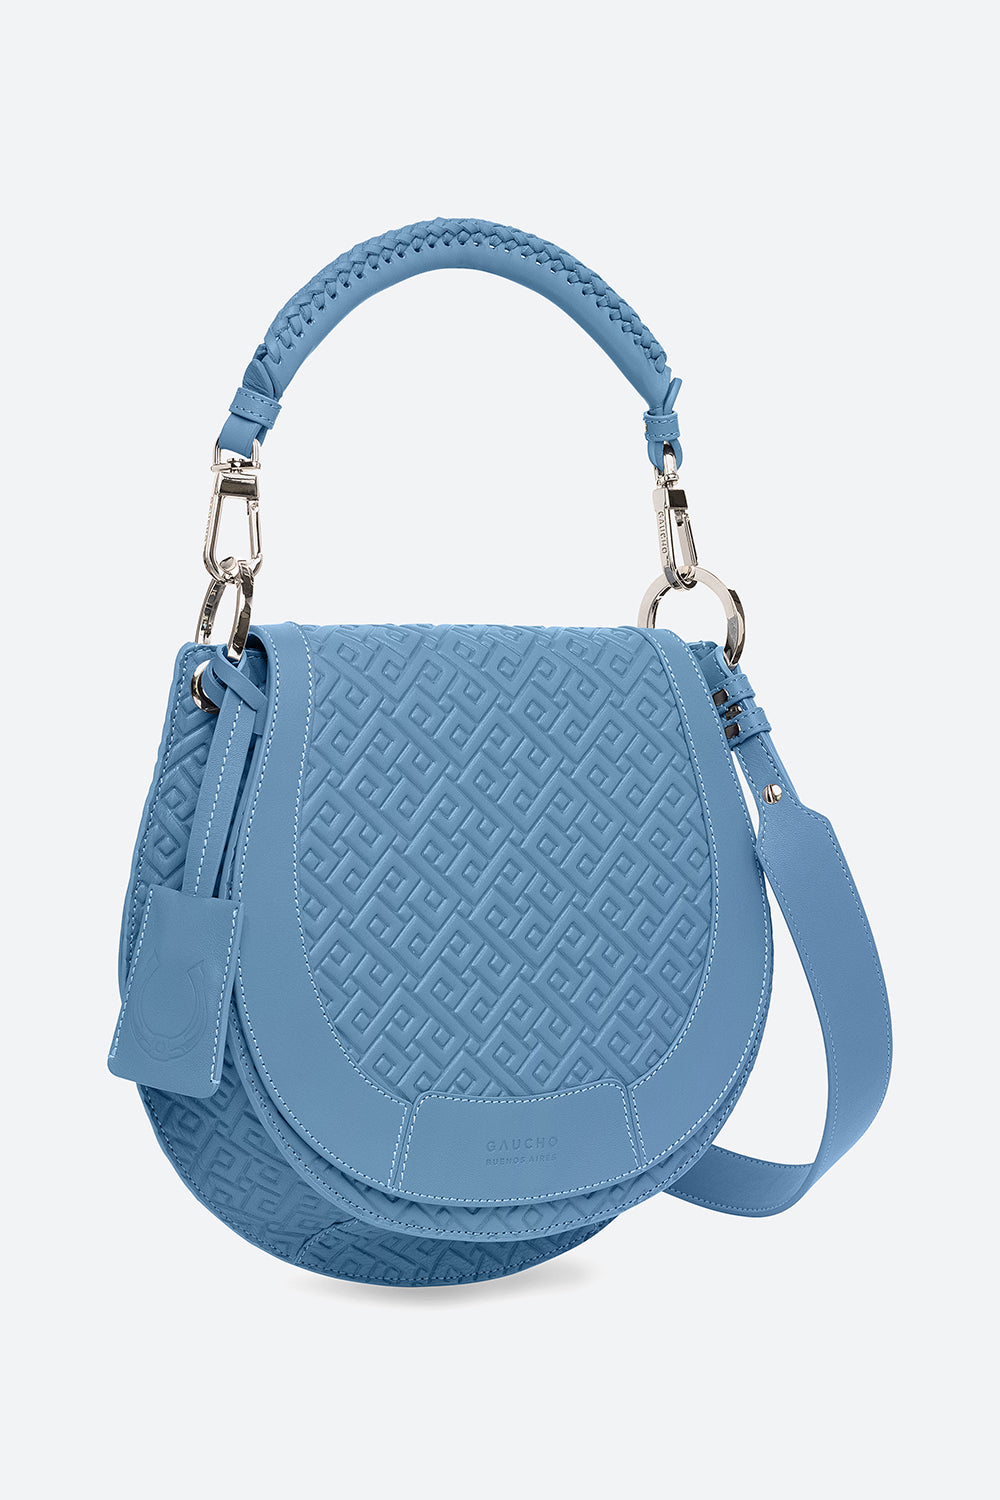 The Lucky Bag, Embossed Leather Saddle Bag in Sky Blue